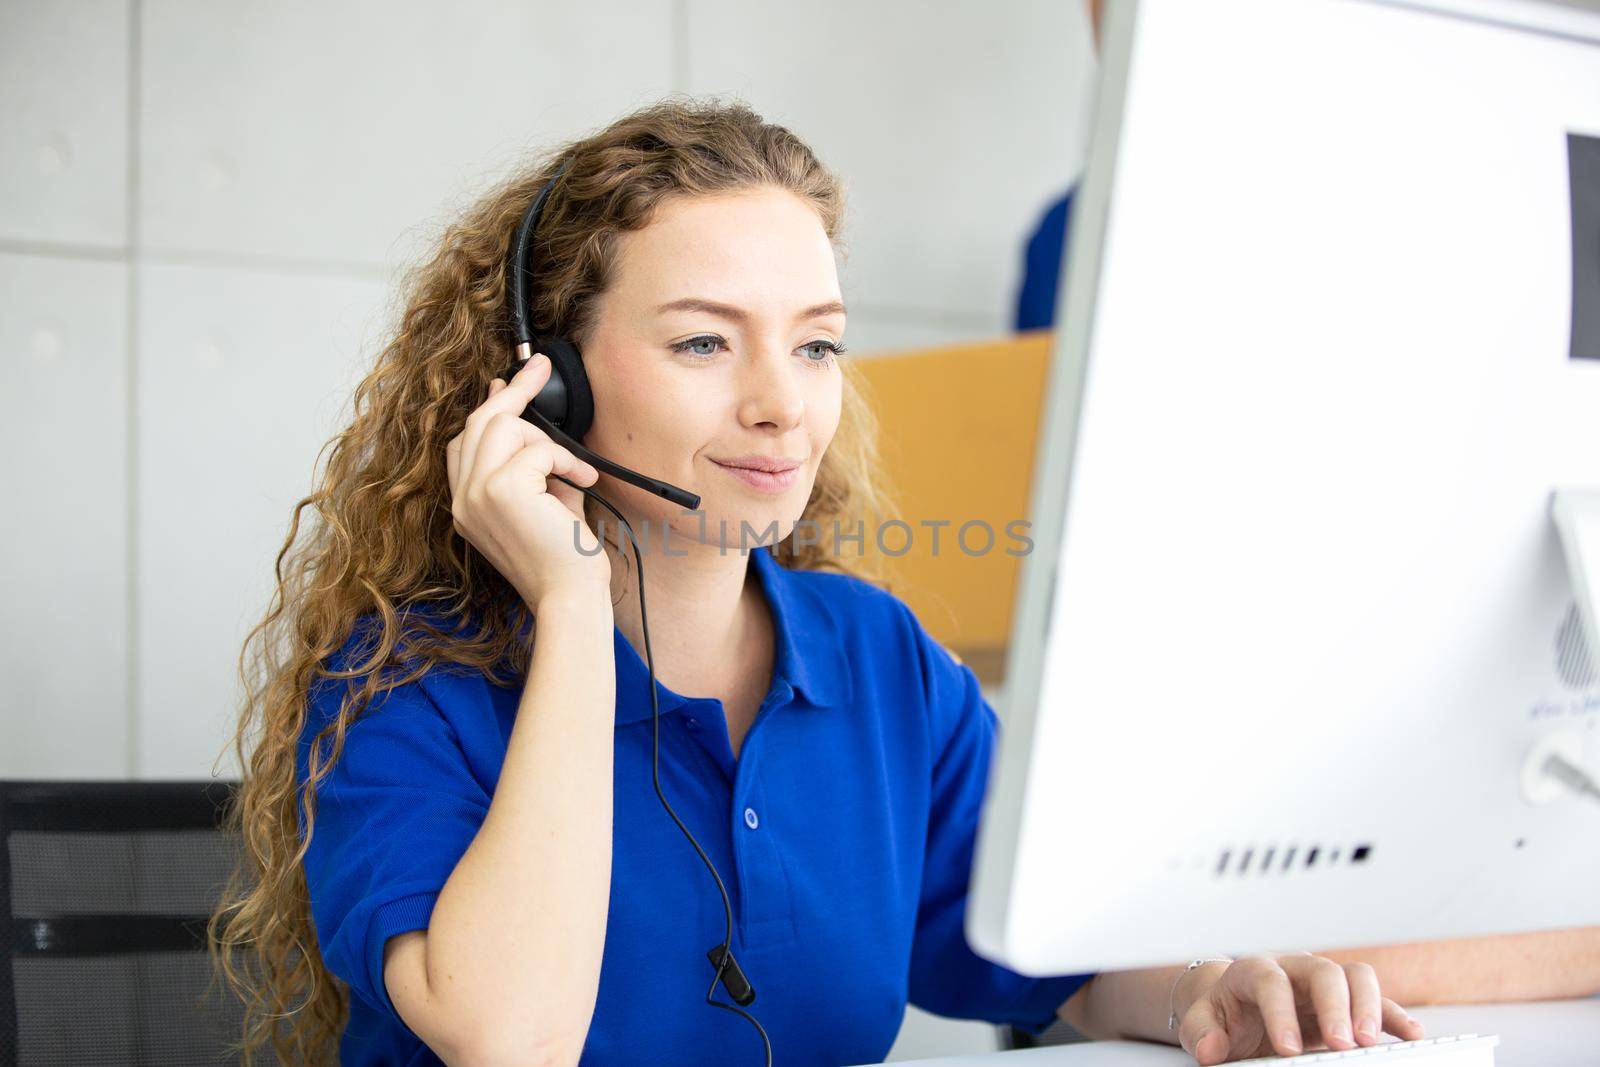 Call center operator in headset while consulting client. Telemarketing or phone sales. Customer service and business concept.